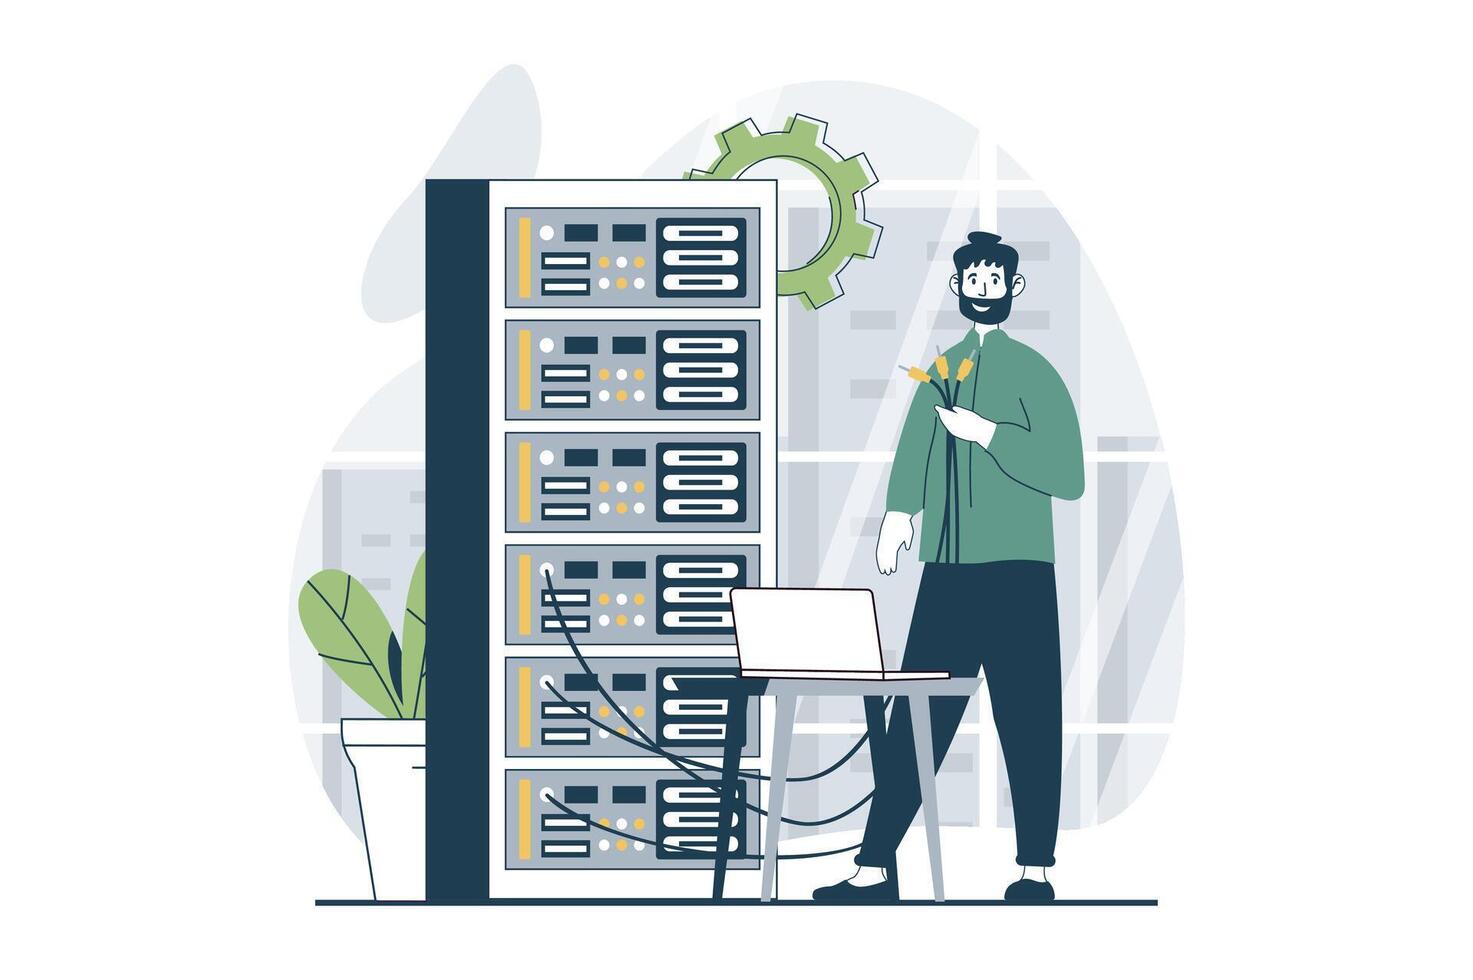 Server maintenance concept with people scene in flat design for web. Man working in server rack room, making repair and fixing problem. Vector illustration for social media banner, marketing material.